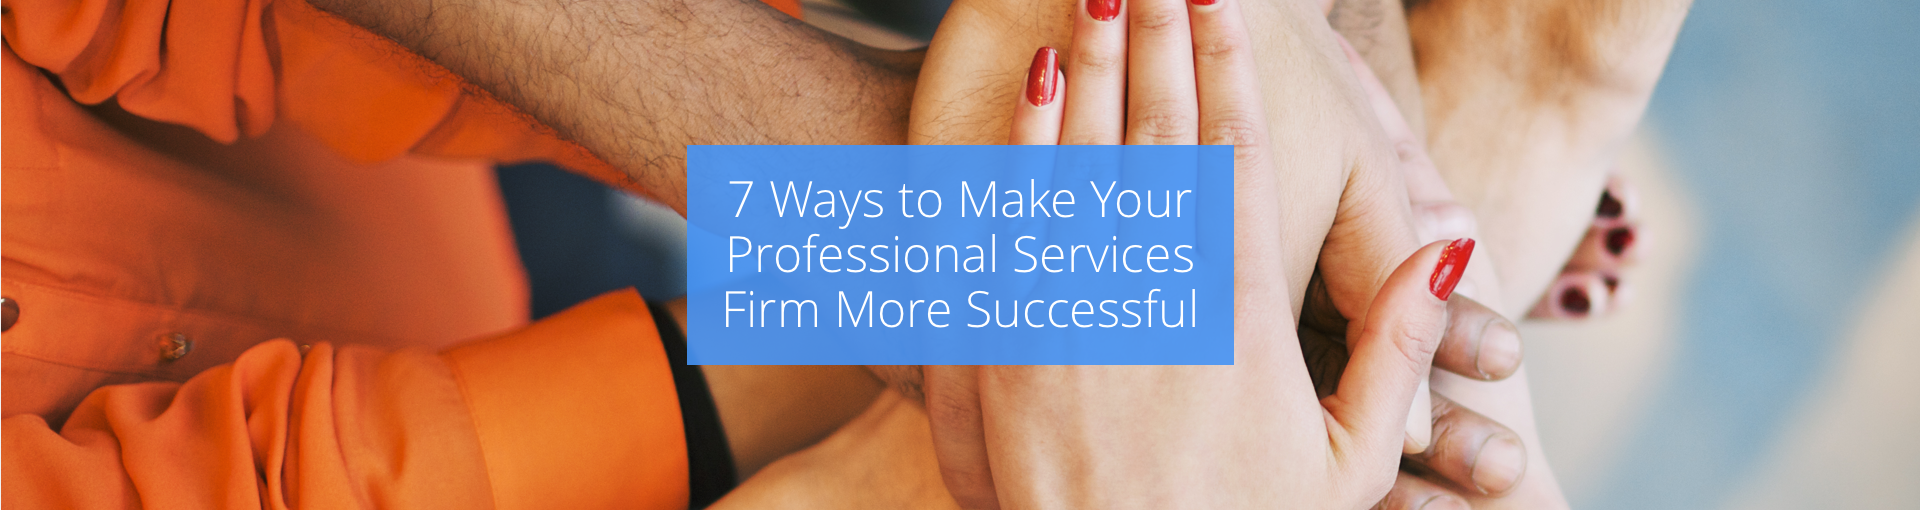 7 Ways to Make Your Professional Services Firm More Successful Featured Image